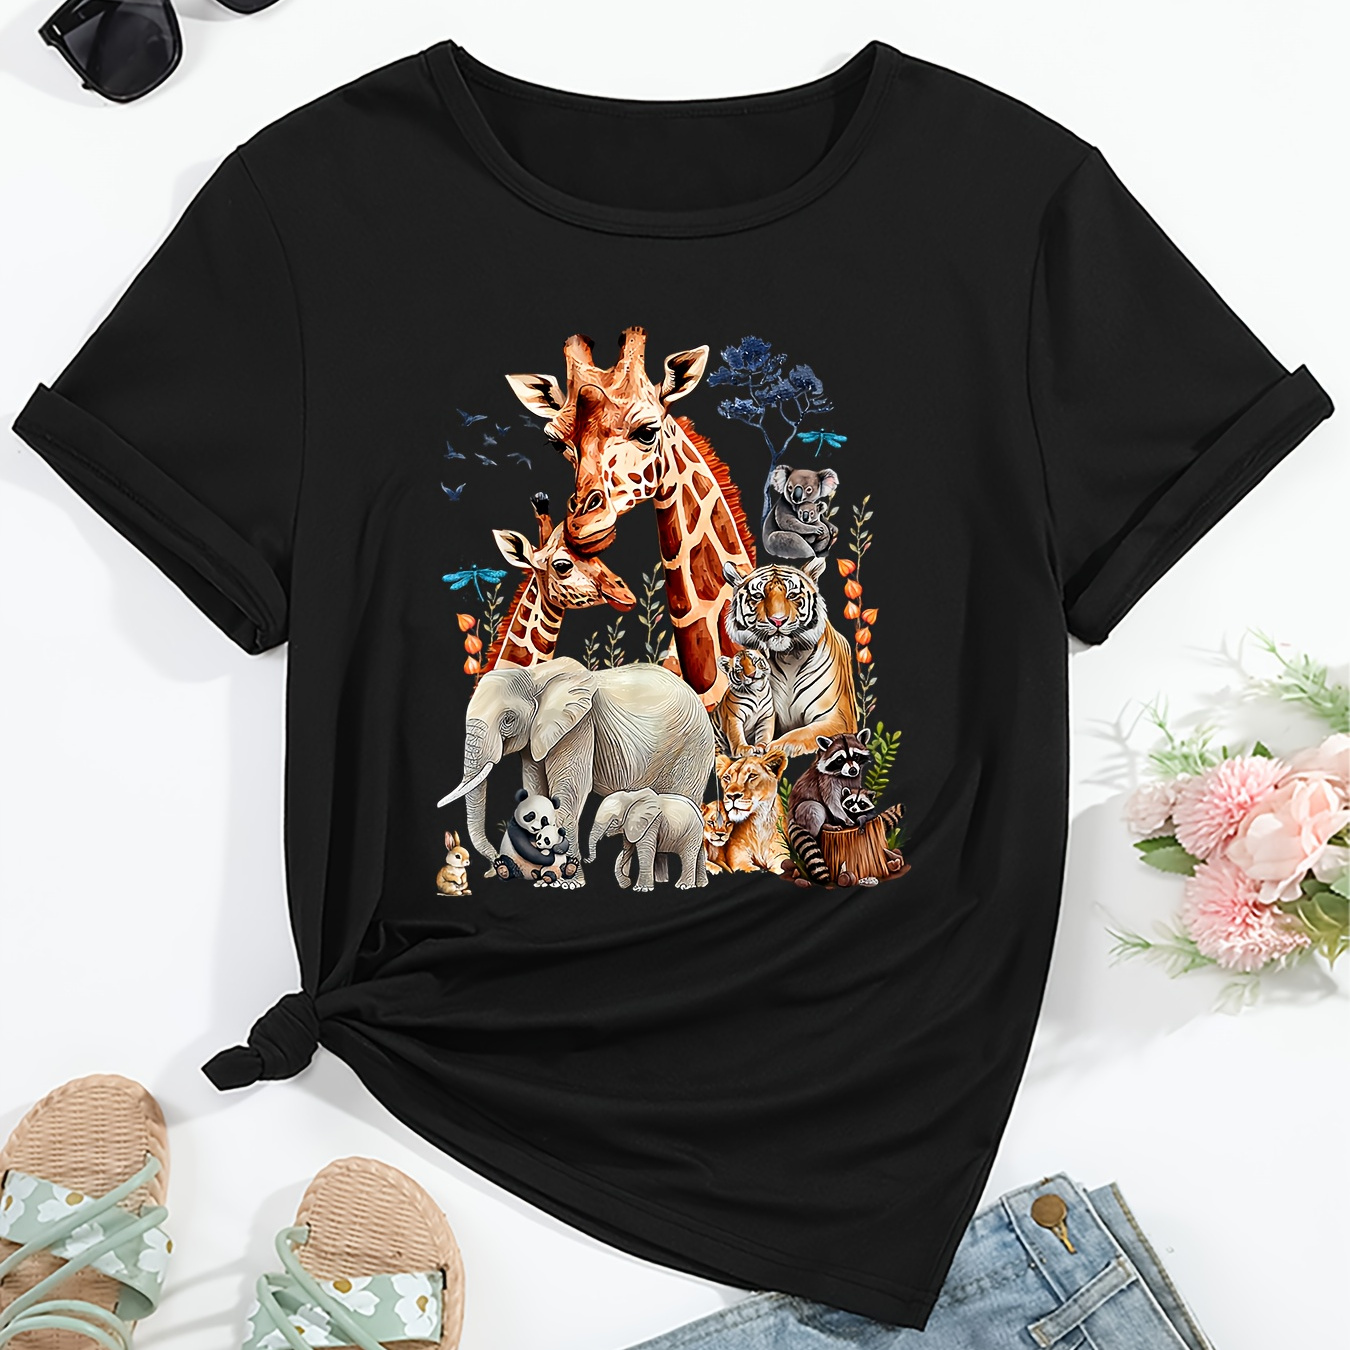 

Women's Casual Zoo Animals Print T-shirt, Short Sleeve, Crew Neck, Soft Fabric, Relaxed Fit, Wildlife Jungle Graphic Tee For Birthday Party & Daily Wear